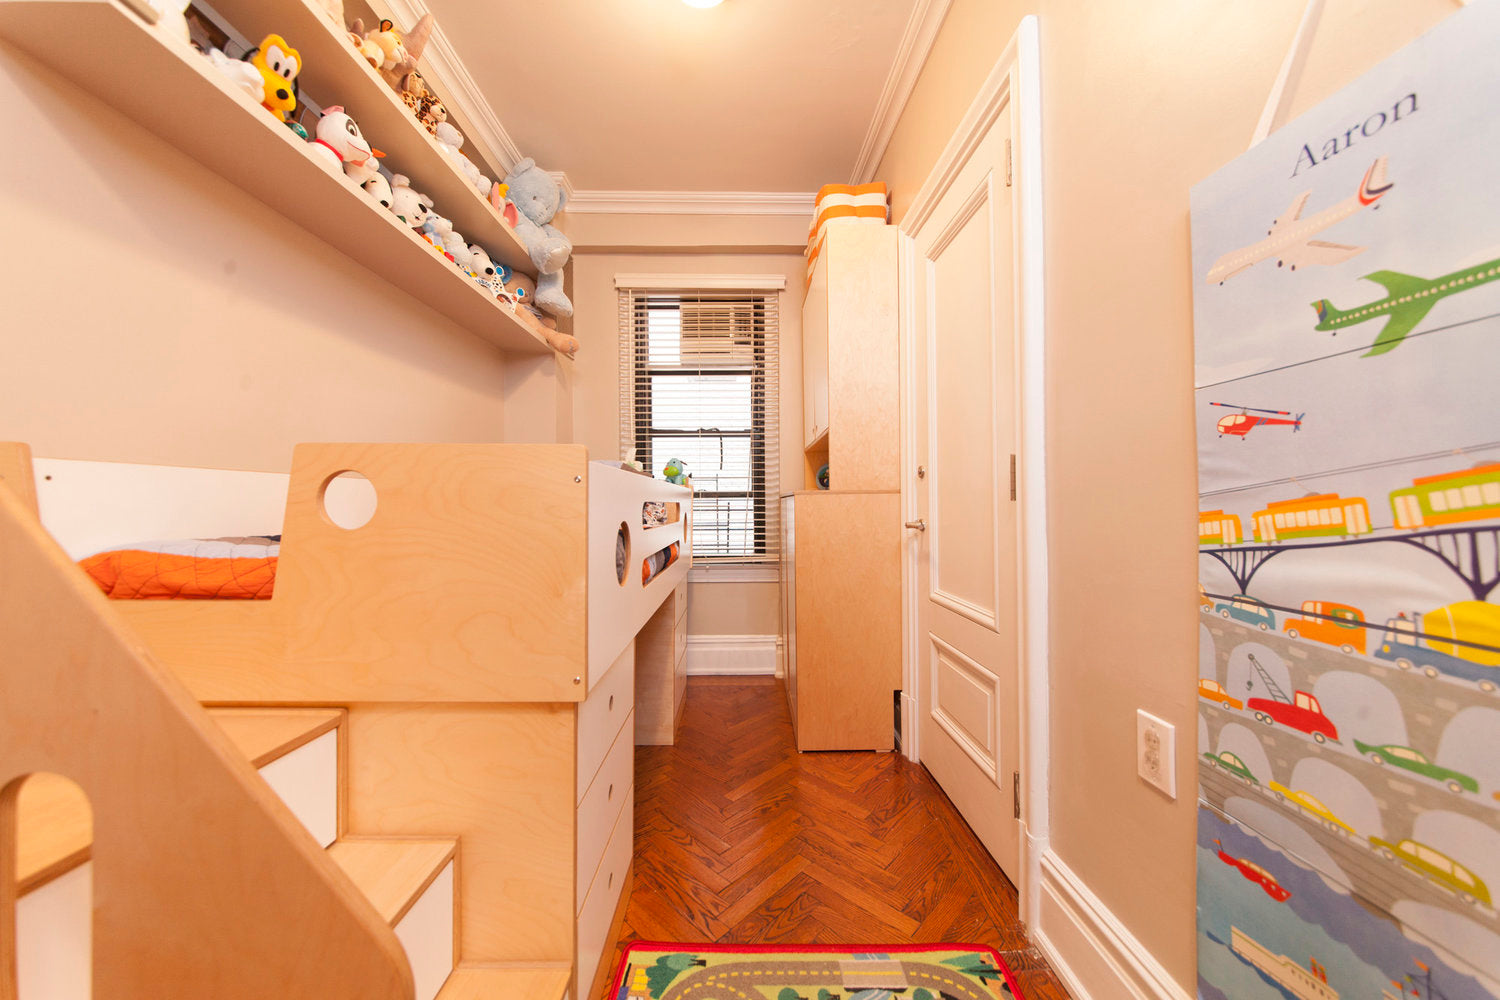 Child’s bedroom with bunk bed, toys, shelves, and colorful rug.